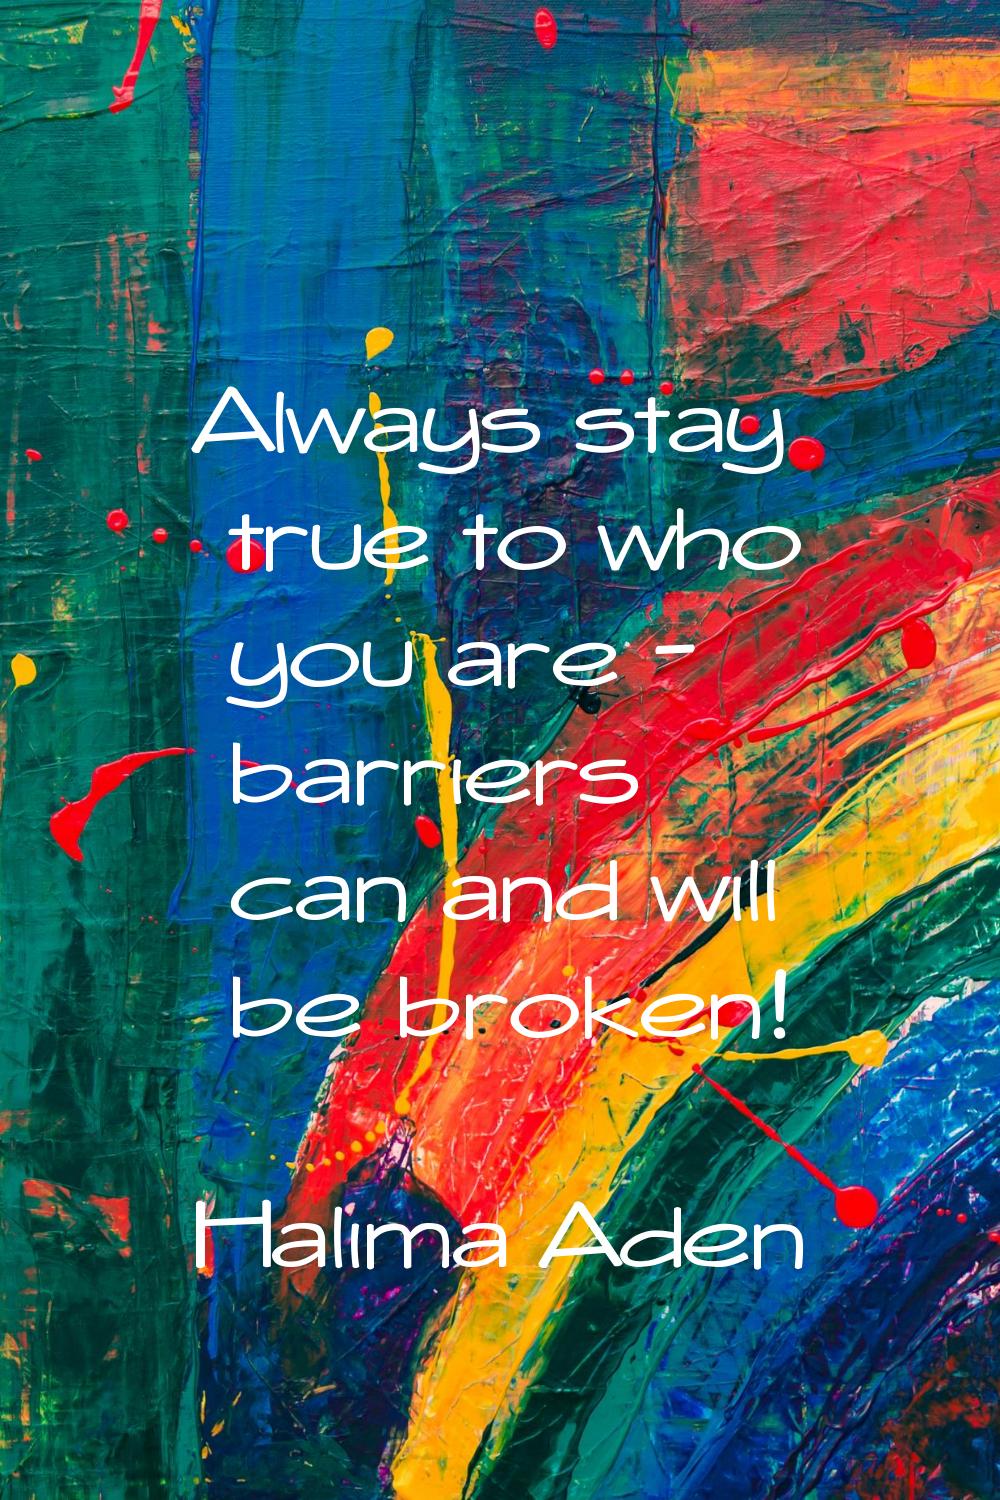 Always stay true to who you are - barriers can and will be broken!